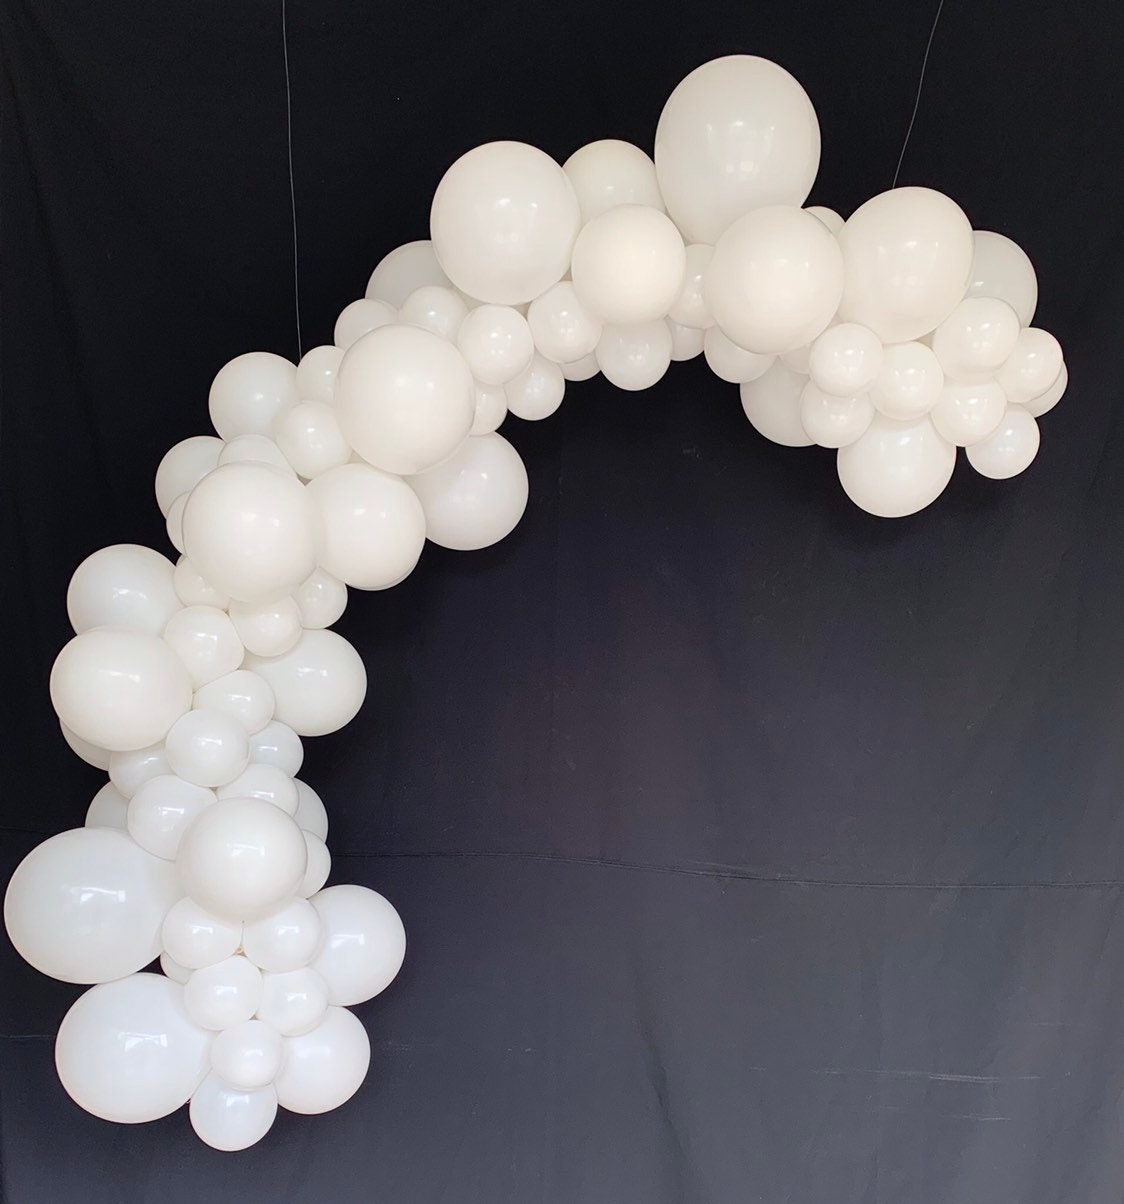 3ft Latex Balloons Balloon Columns - Ground Based - Professionally Arranged  and Hand Delivered by